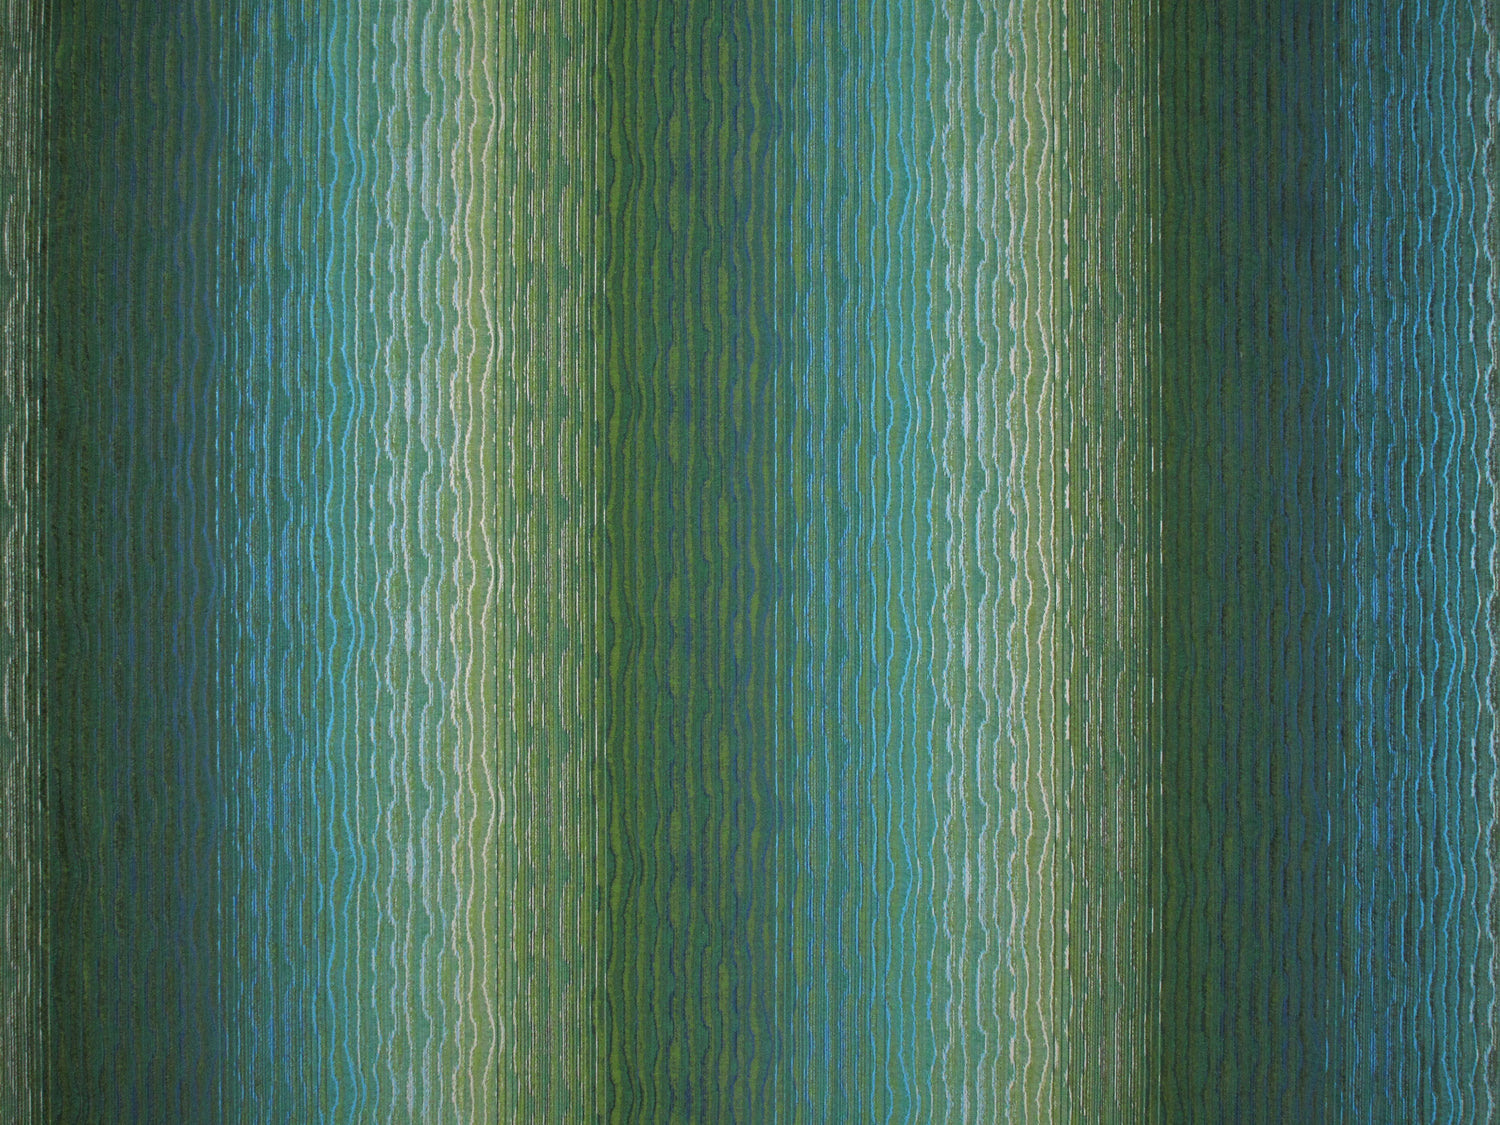 Chamarel Falls fabric in leaf color - pattern number M1 00028005 - by Scalamandre in the Old World Weavers collection